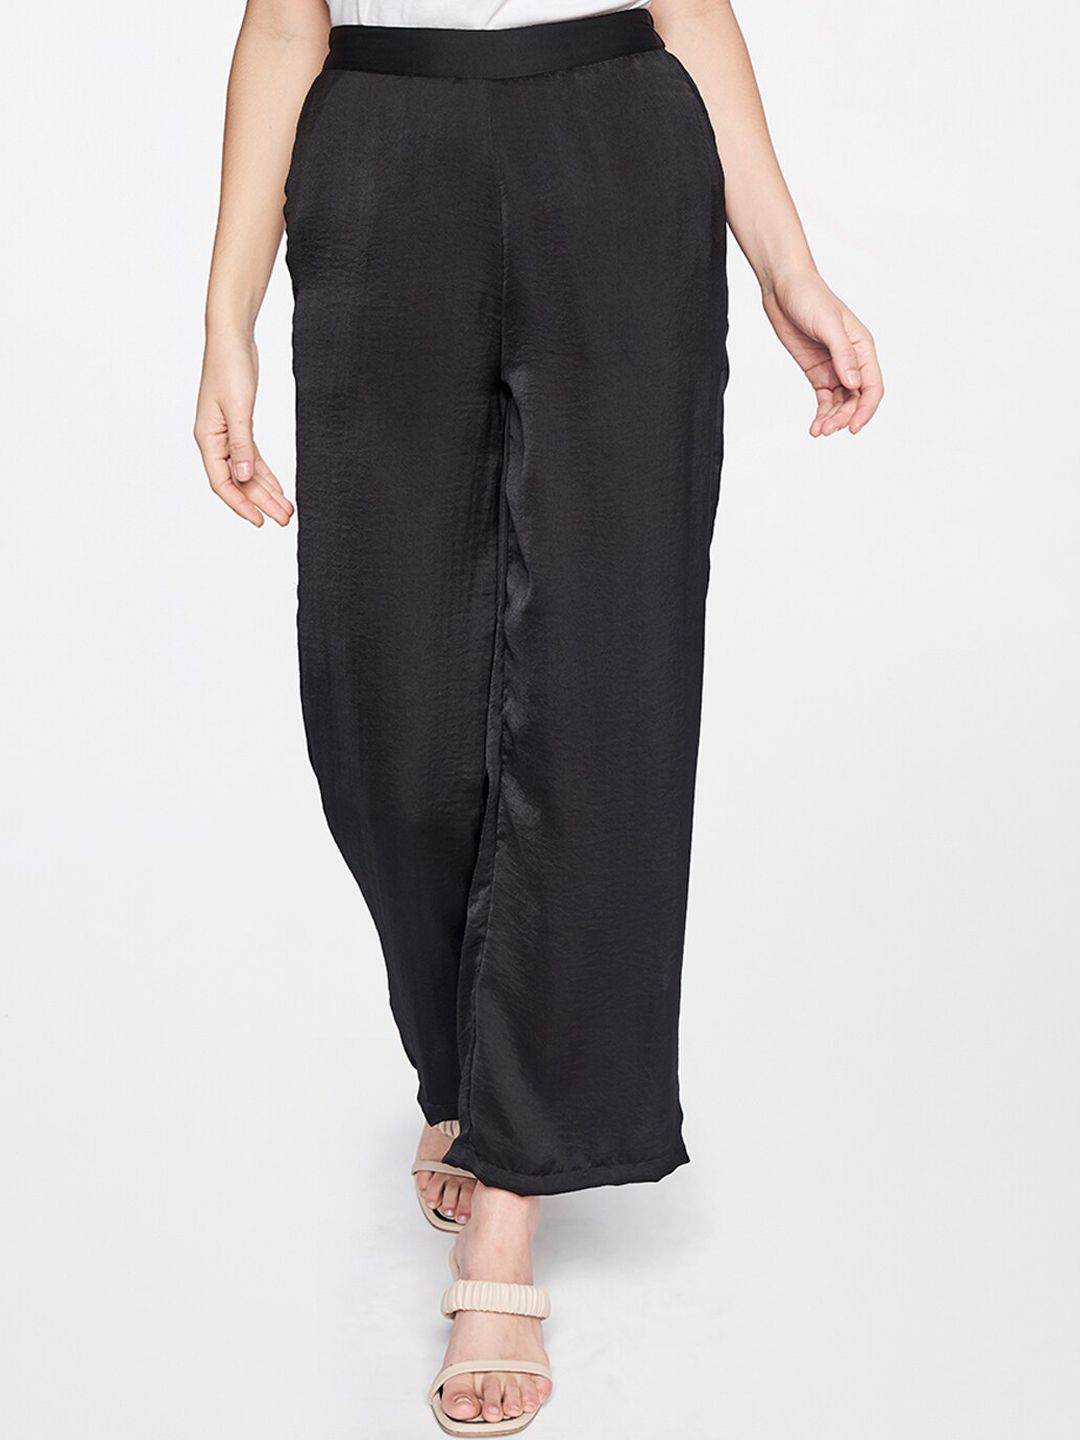 AND Women Black Trousers Price in India